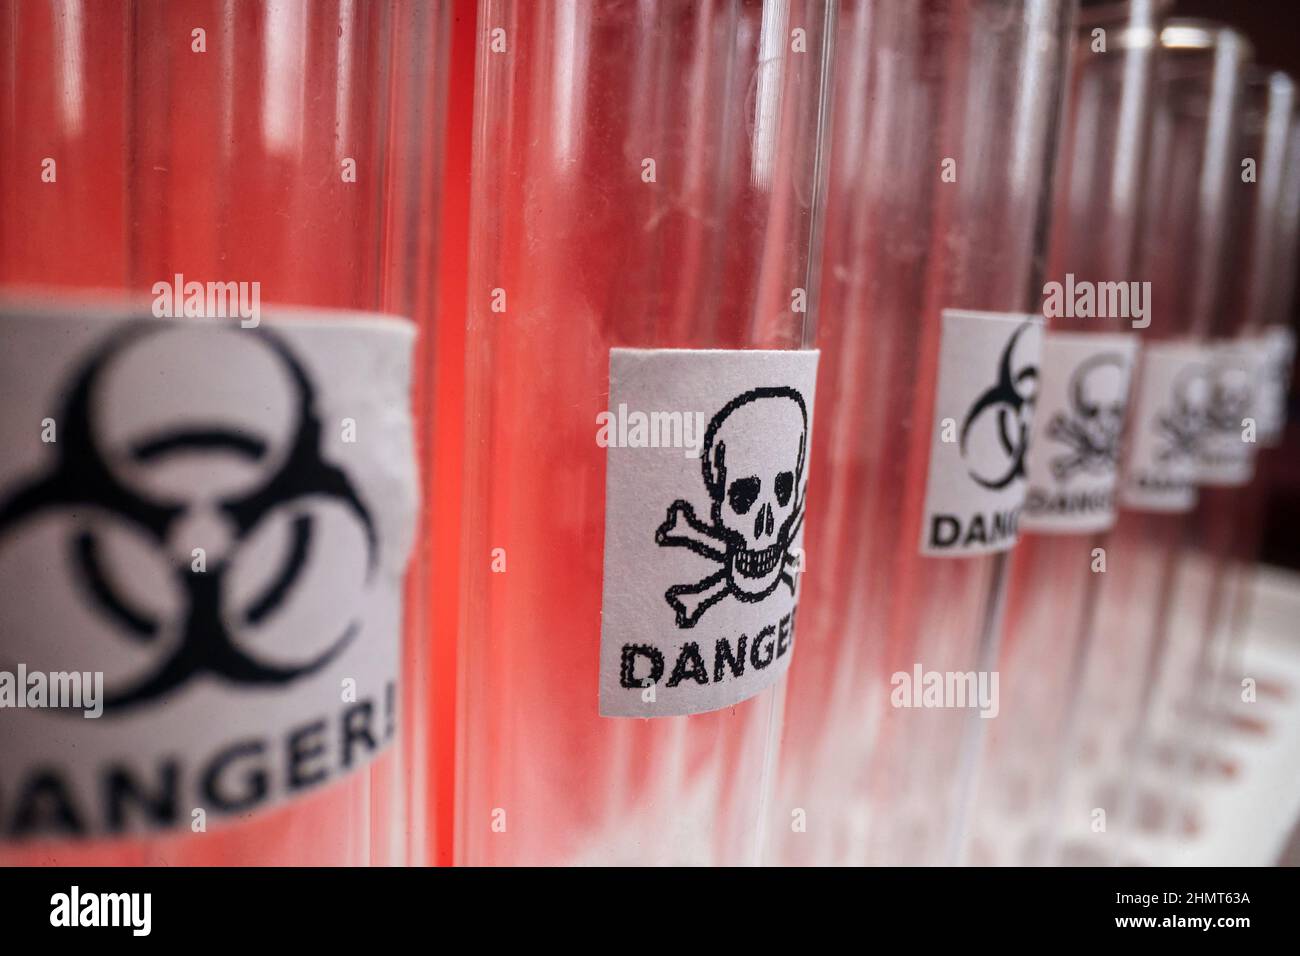 close-up glassware containing danger chemical. Test Tubes Stock Photo